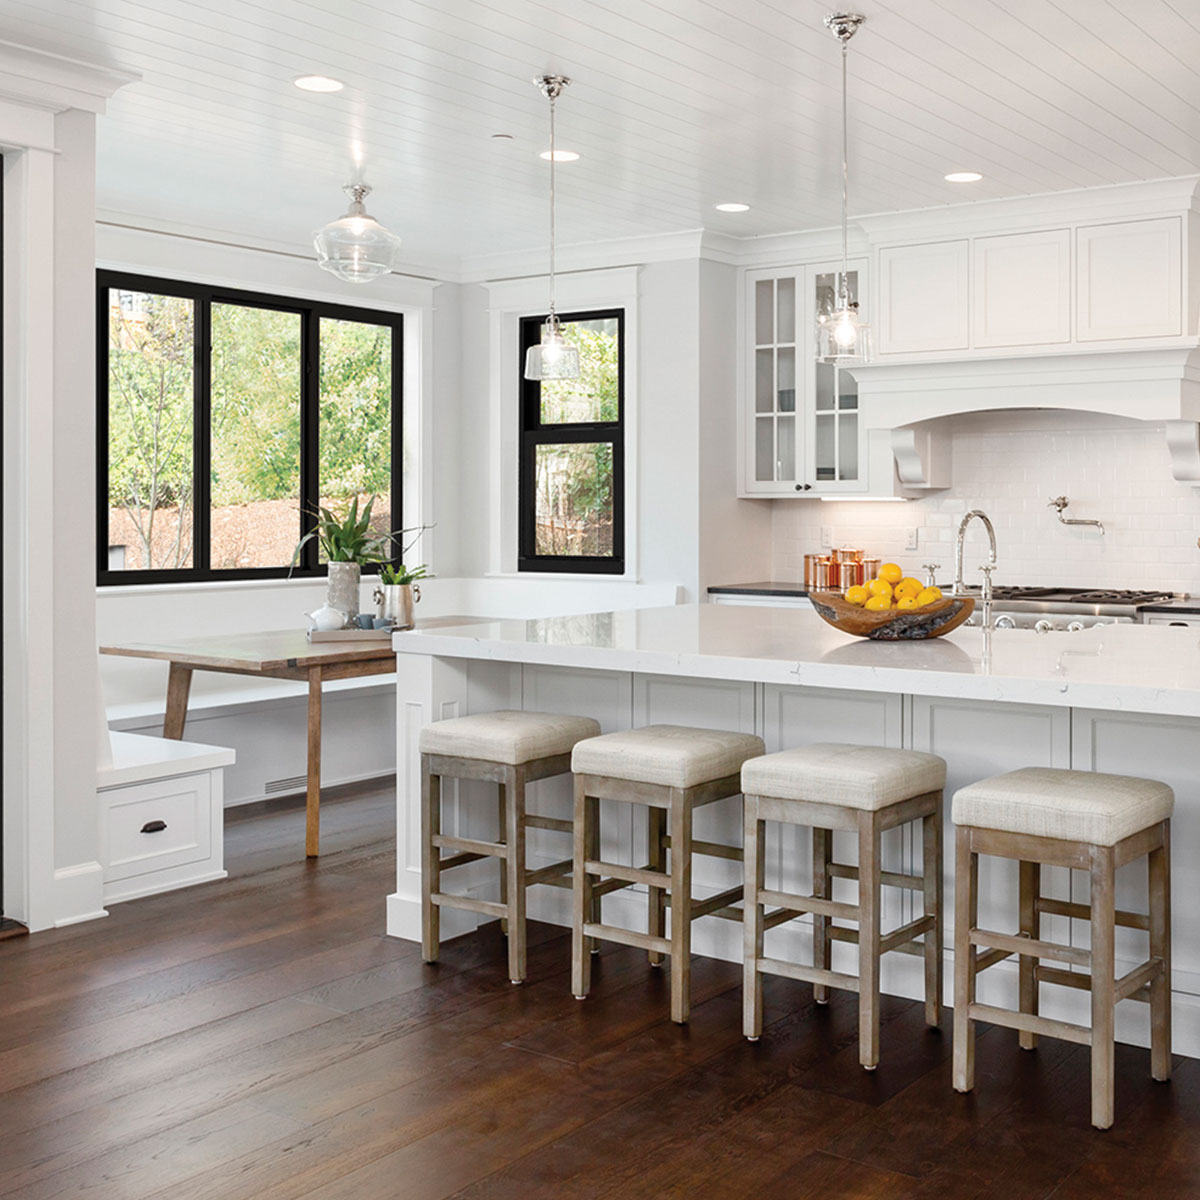 White kitchen with contrasting all-black window frames